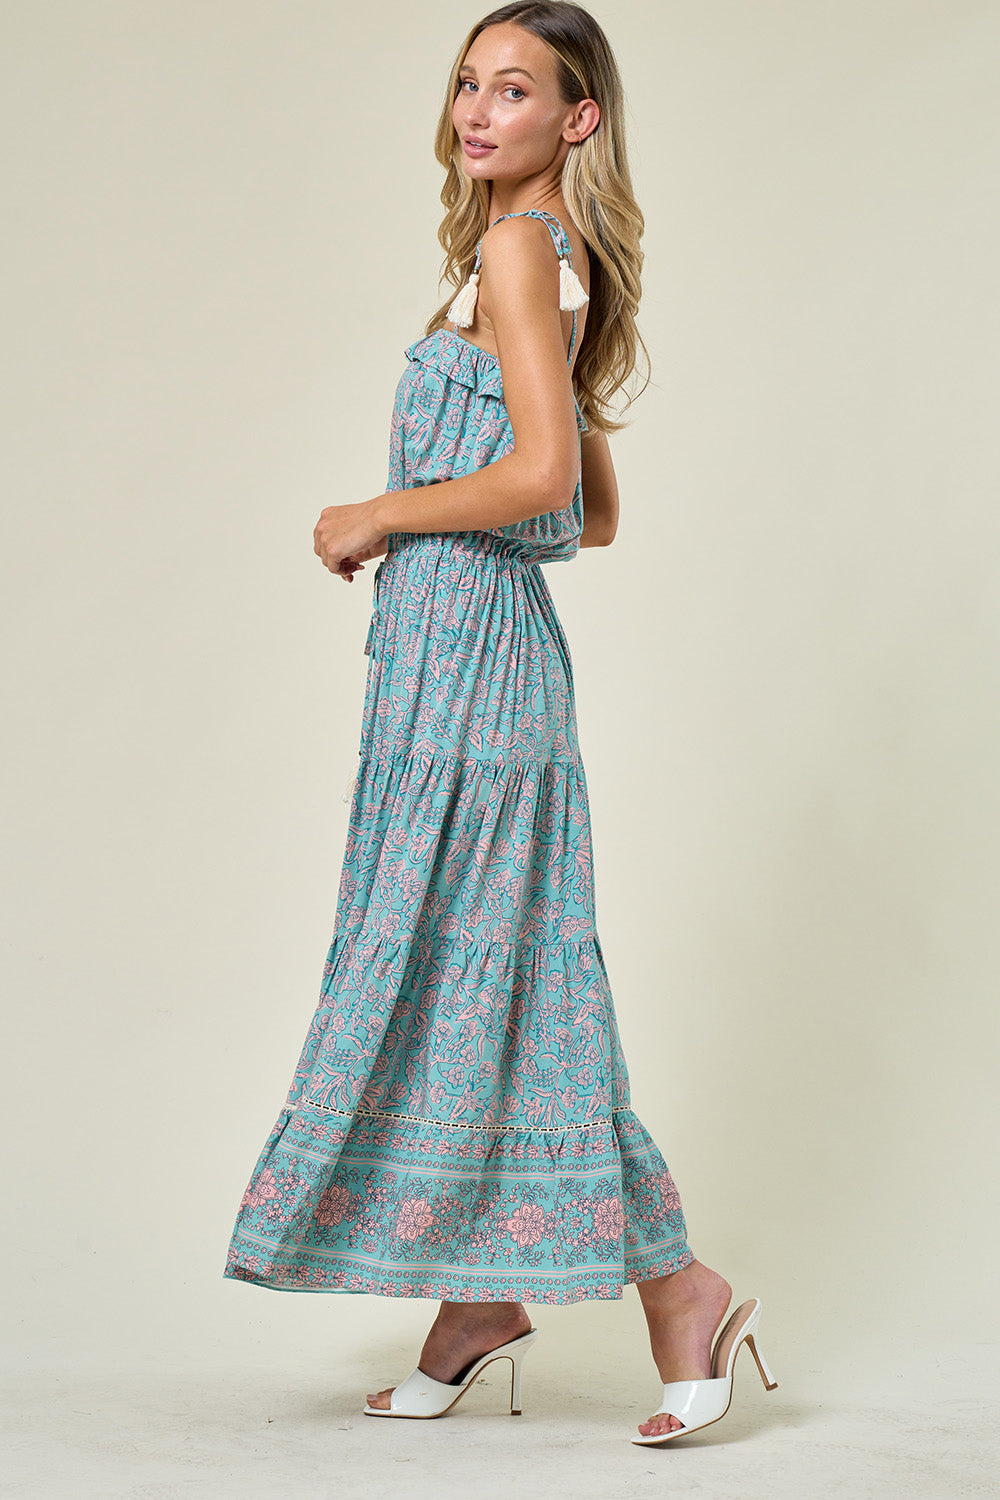 Boho Paisley Print Maxi Dress: Maxi dress with elastic waist and tassel ties, adjustable tassel straps, tiered skirt with crochet inset detail, pull-on style, and ruffle bodice. Boho-chic fashion for a stylish and comfortable look.